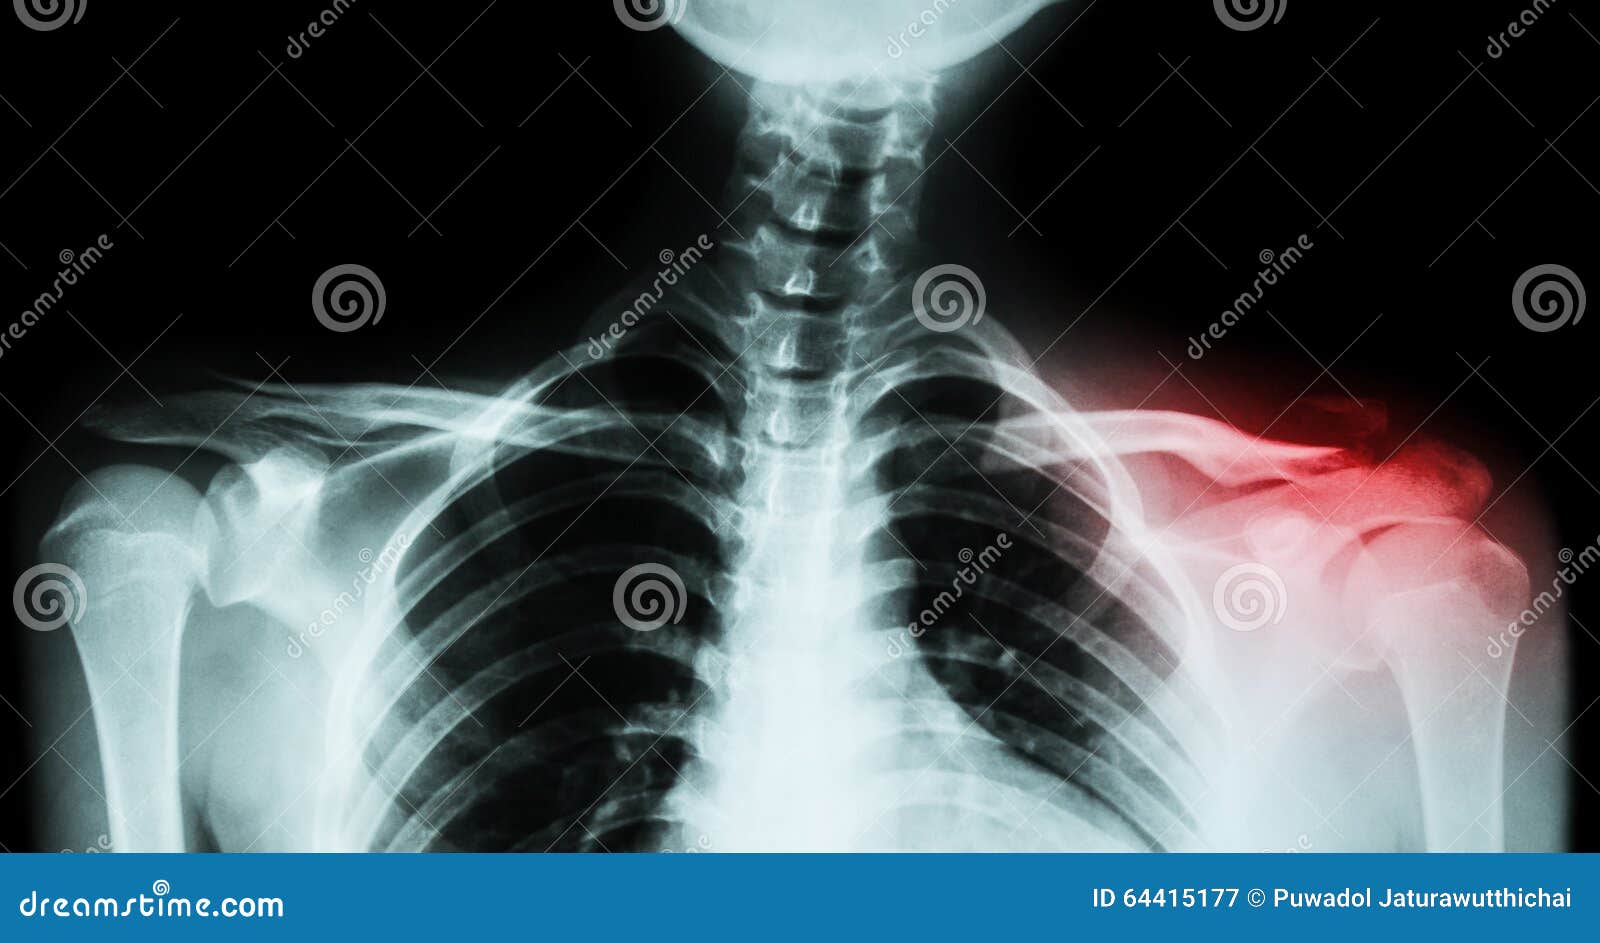 film x-ray both clavicle ap ( front view ) : show fracture distal left clavicle